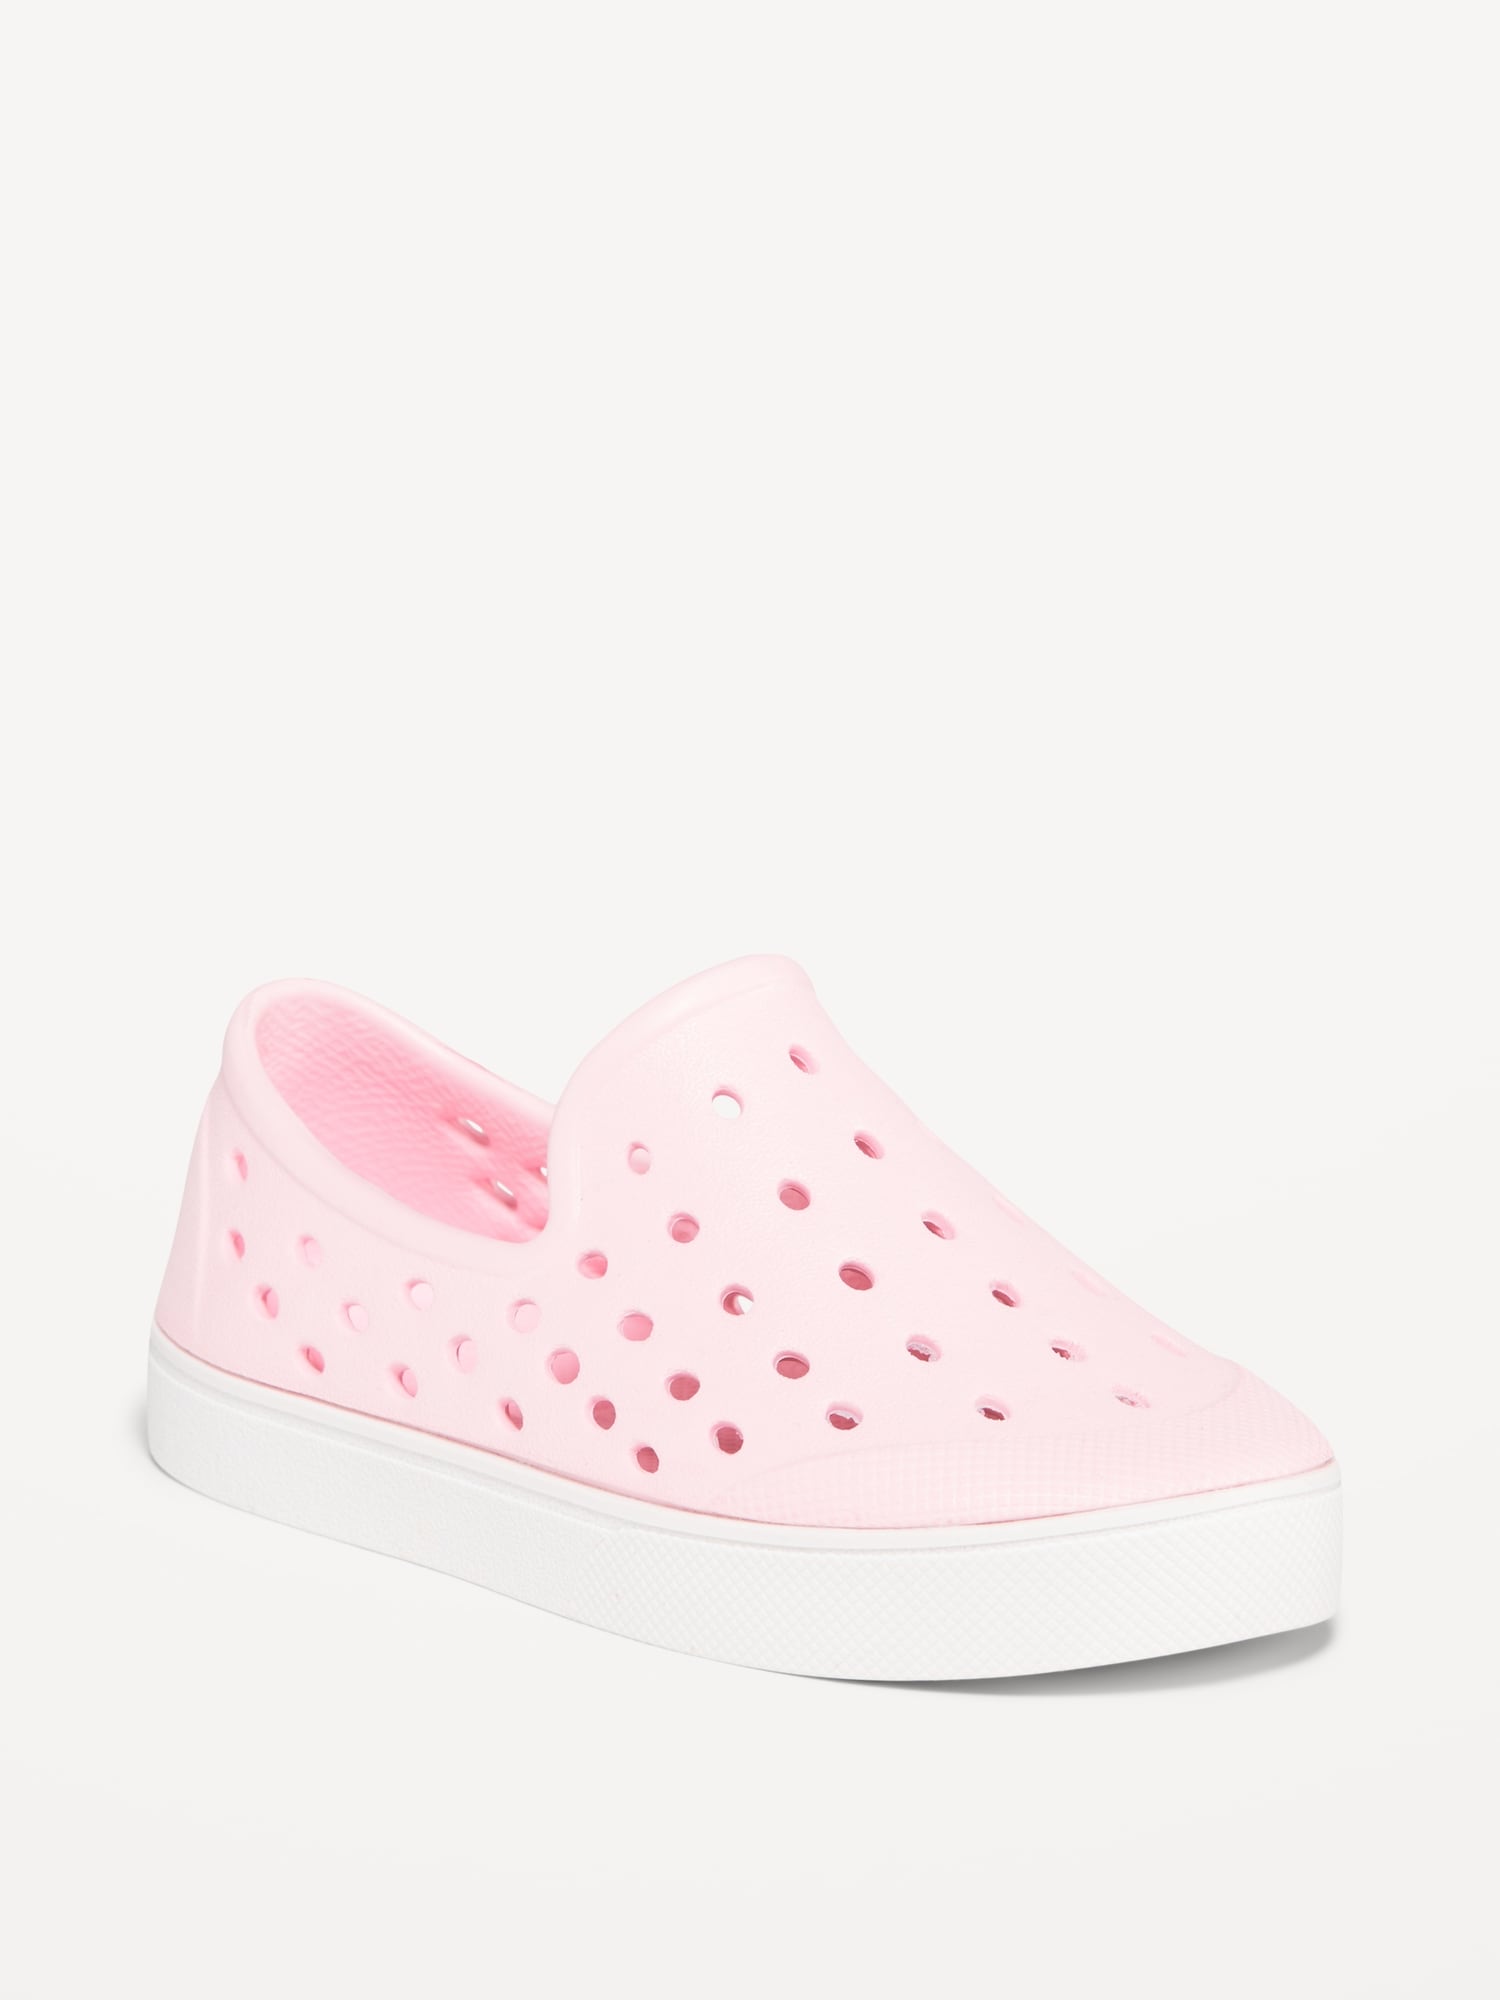 Perforated Slip-On Shoes for Toddler Girls